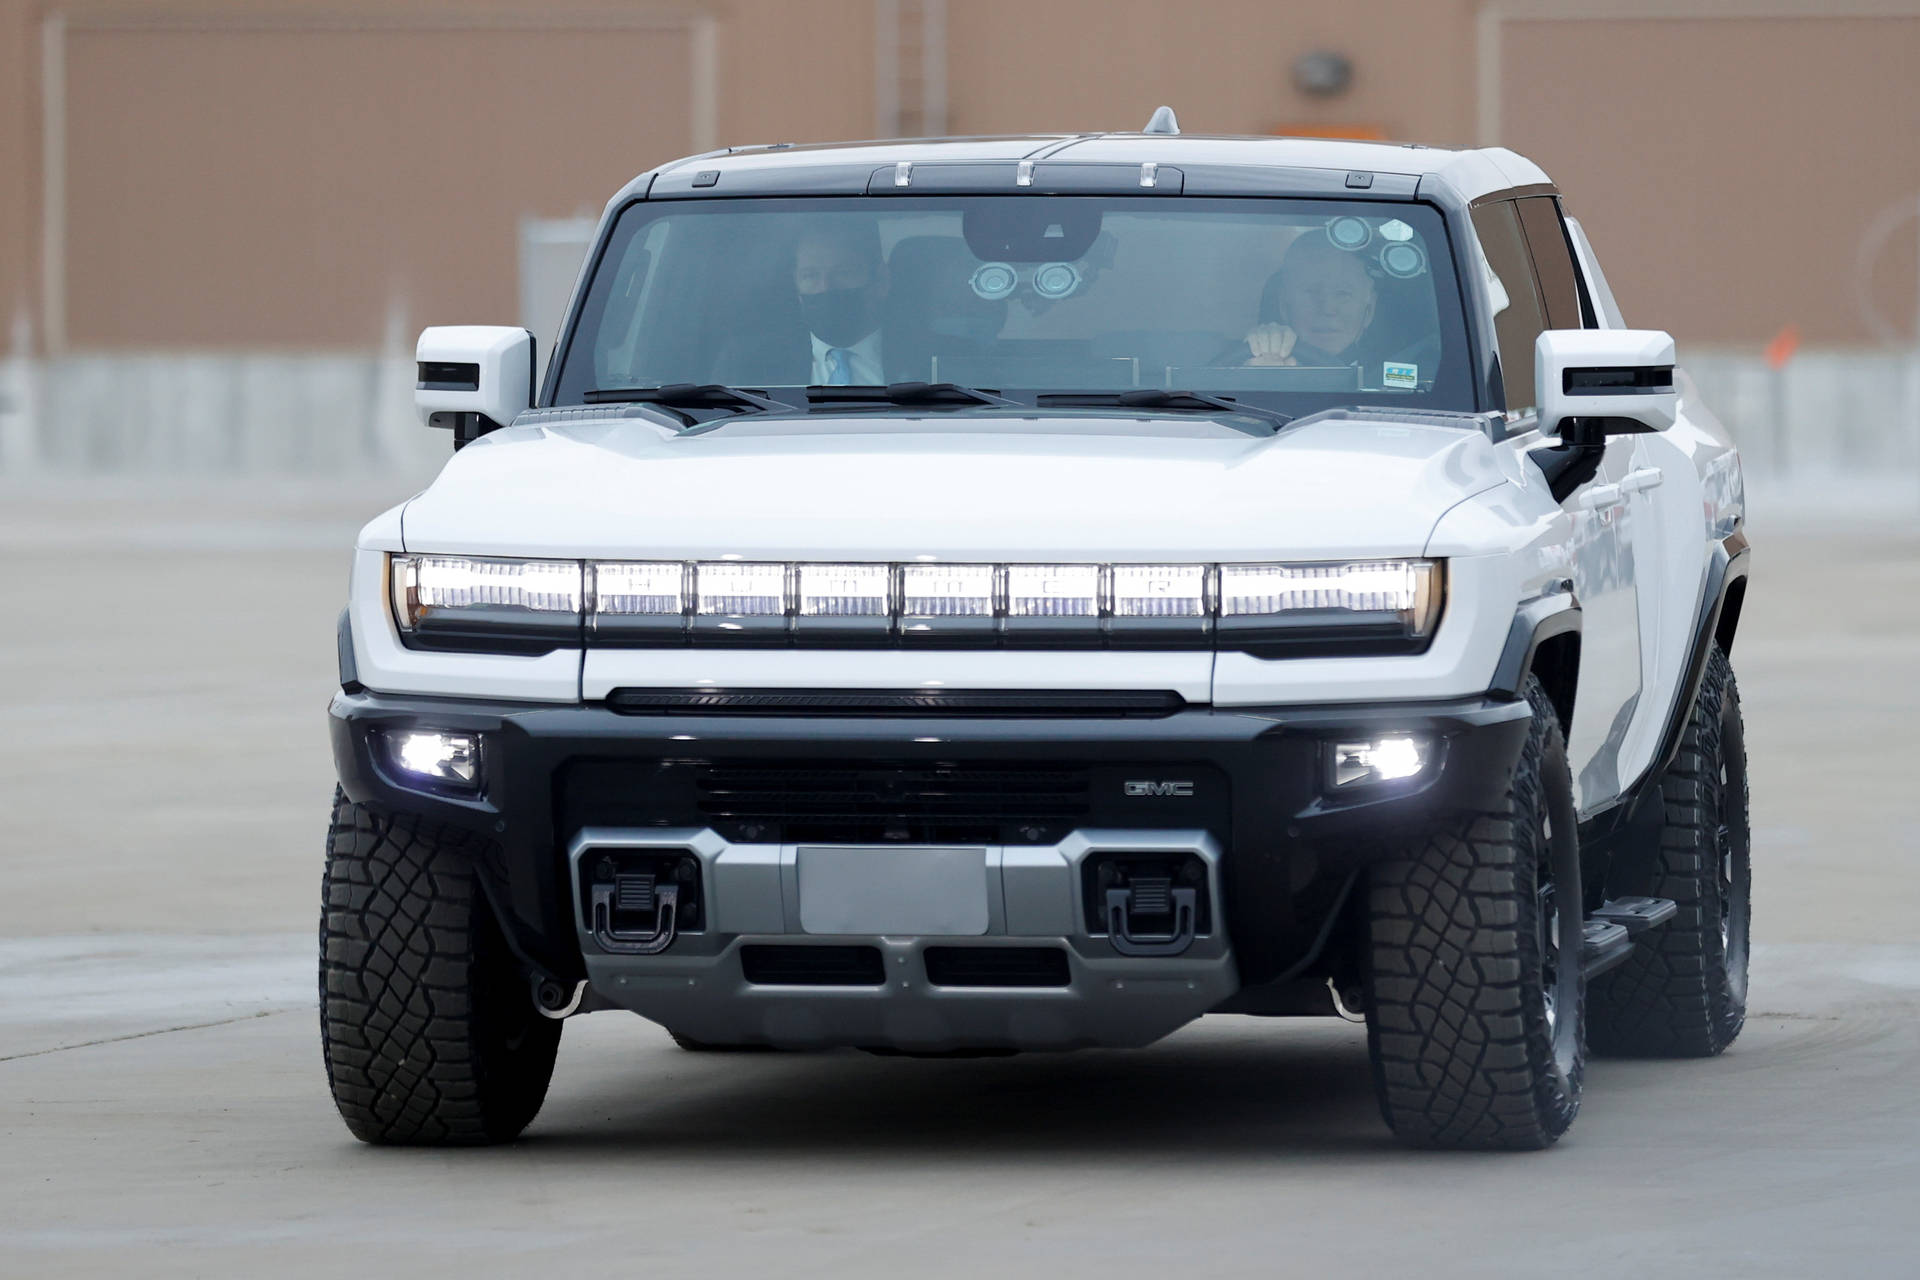 An excellent Hummer pickup truck with white headlights. Wallpaper